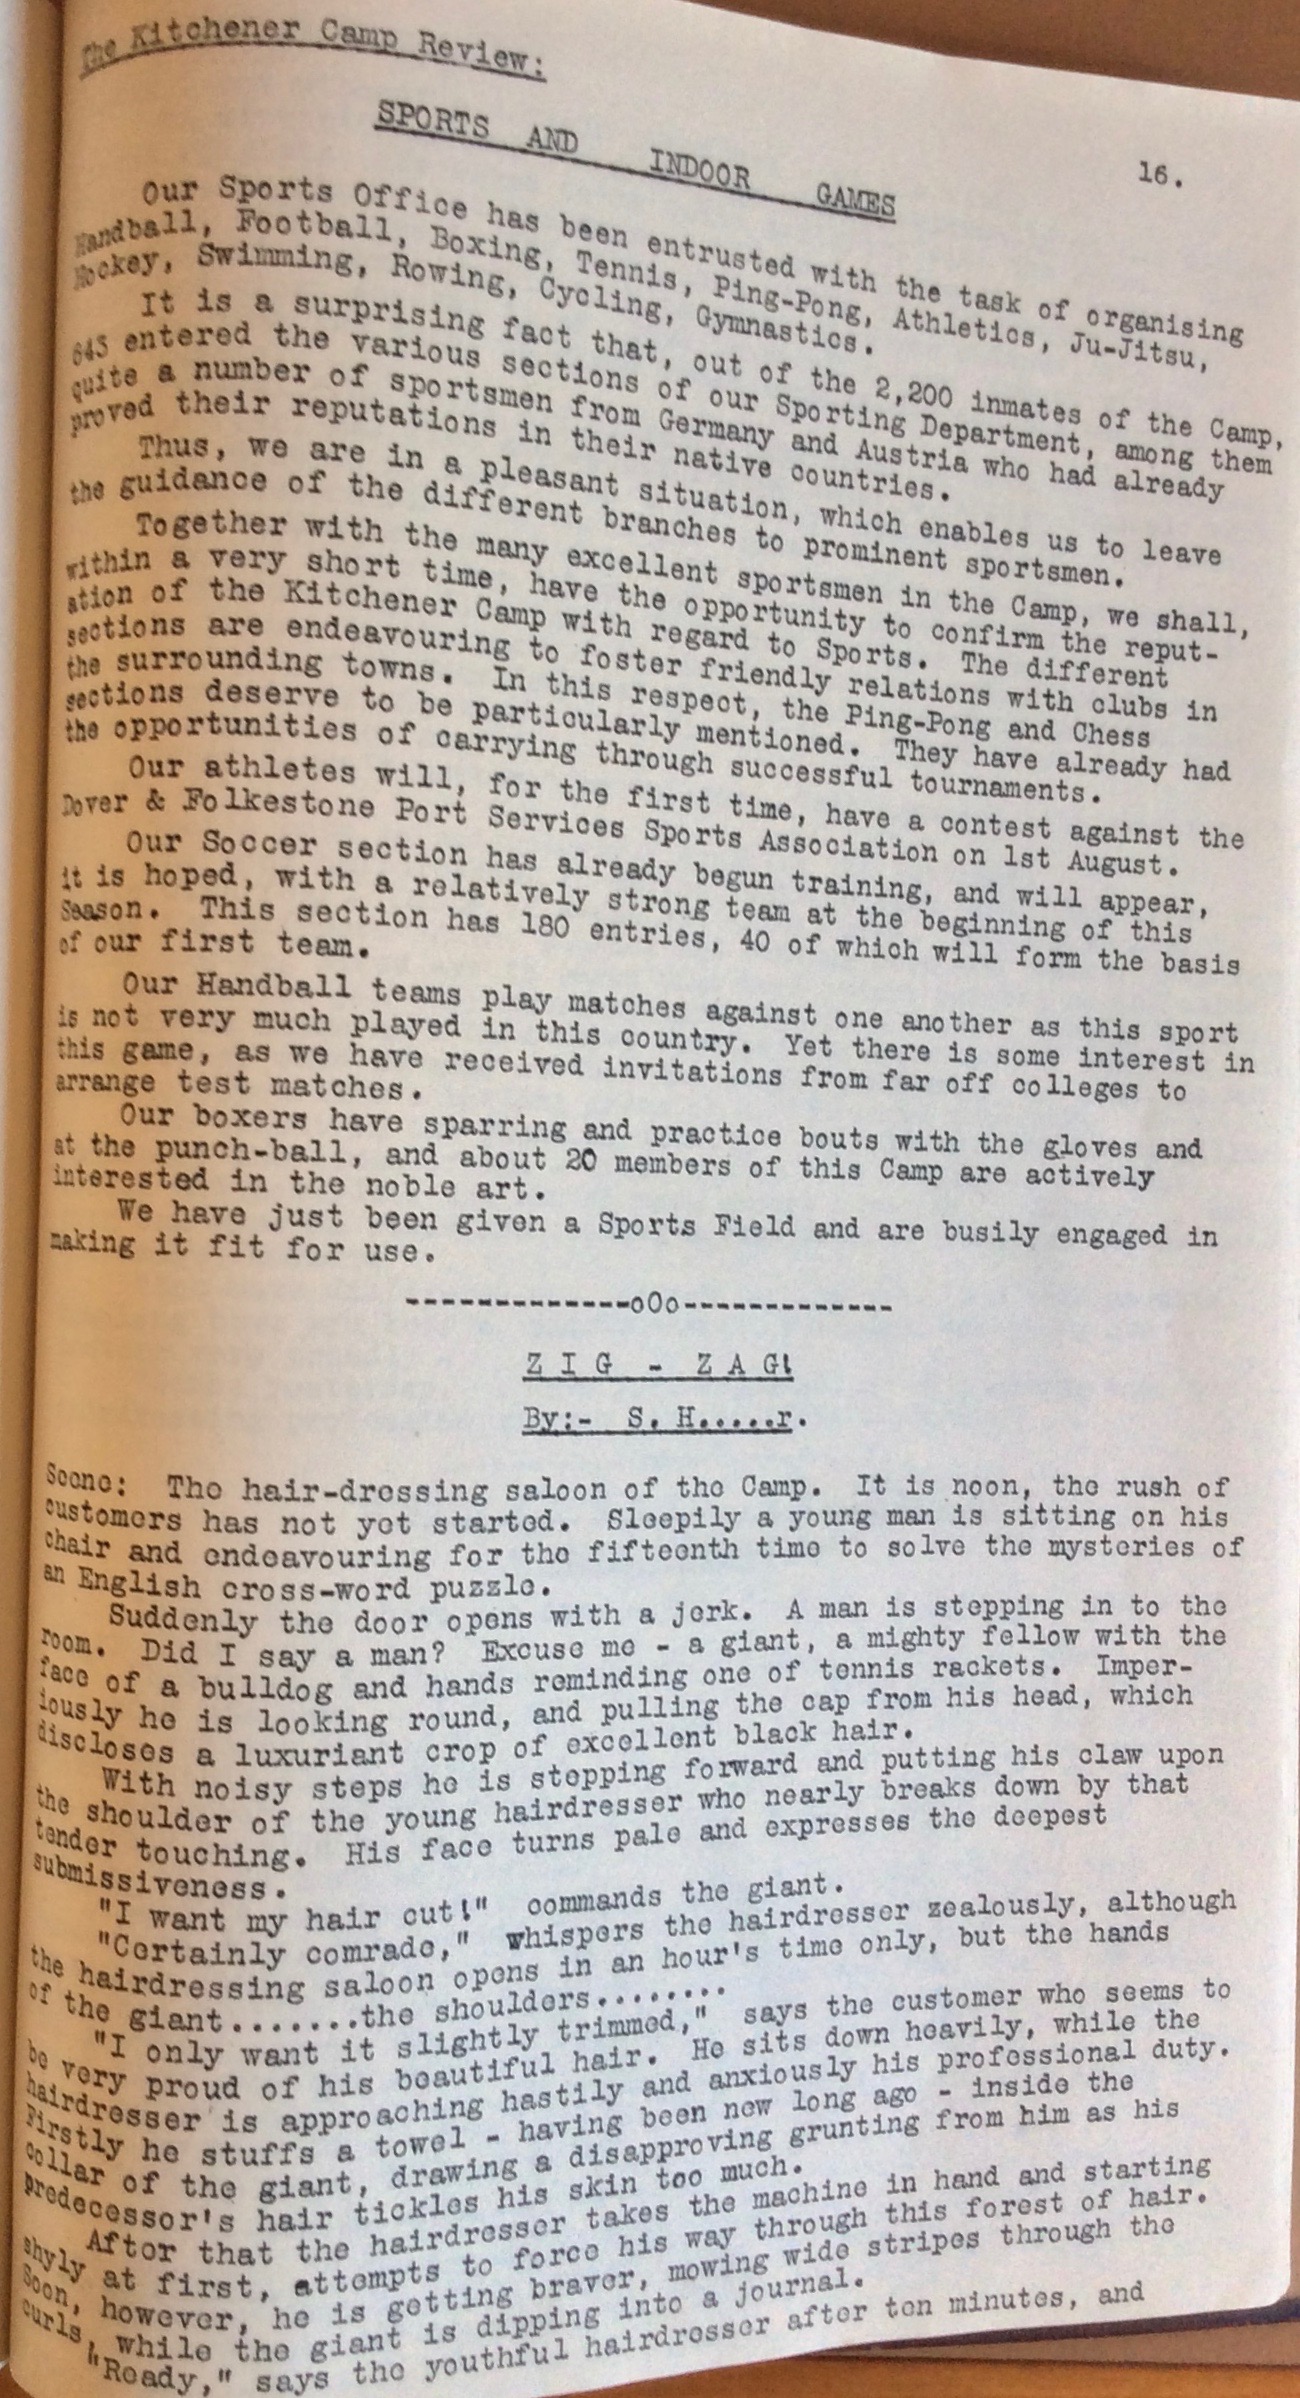 The Kitchener Camp Review, August 1939, page 16